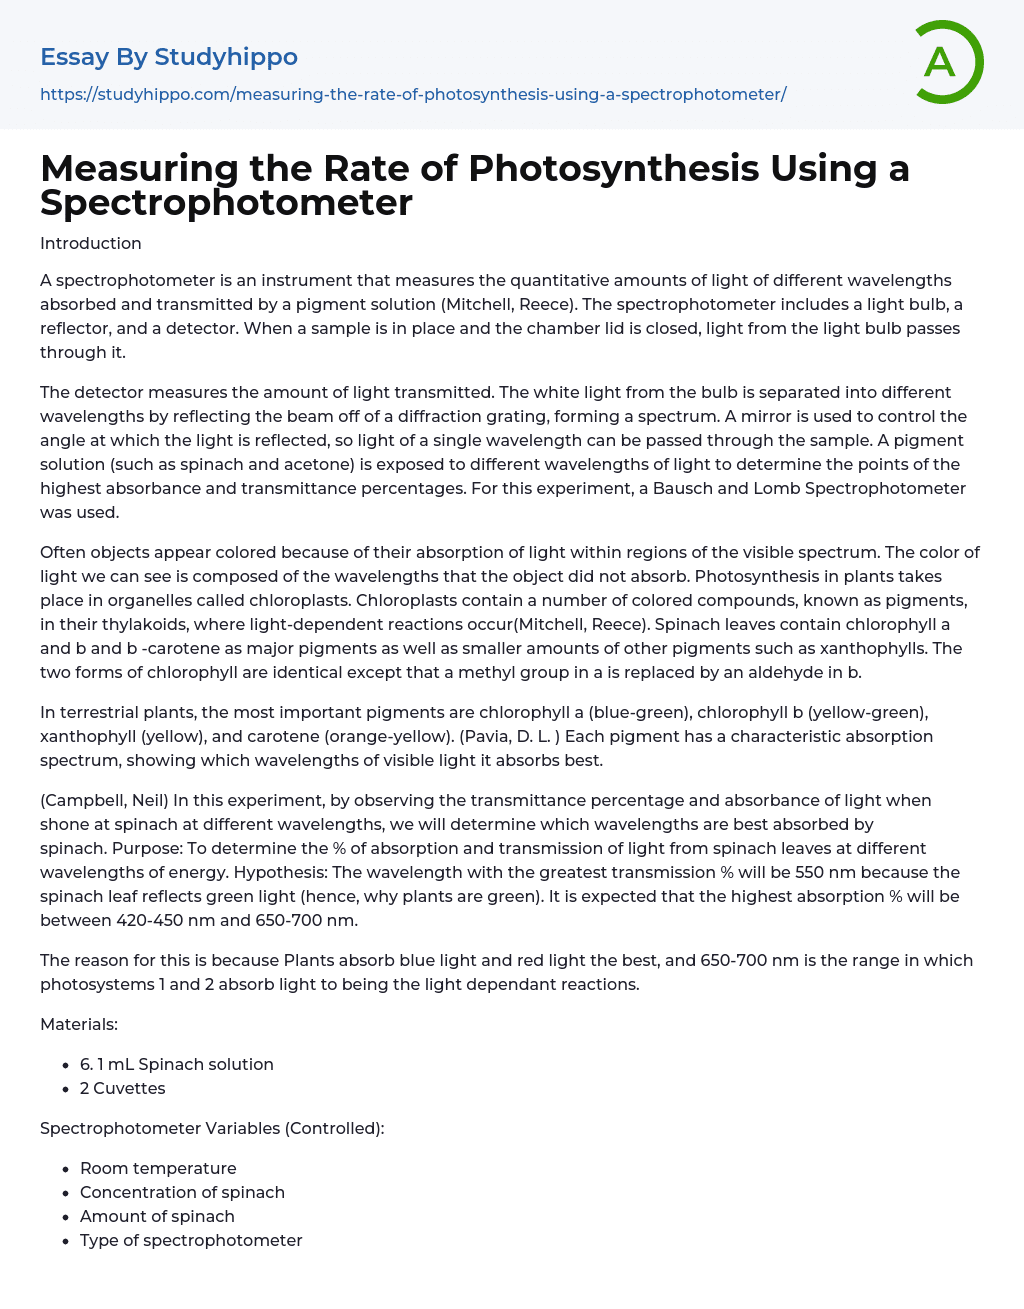 Measuring the Rate of Photosynthesis Using a Spectrophotometer Essay Example